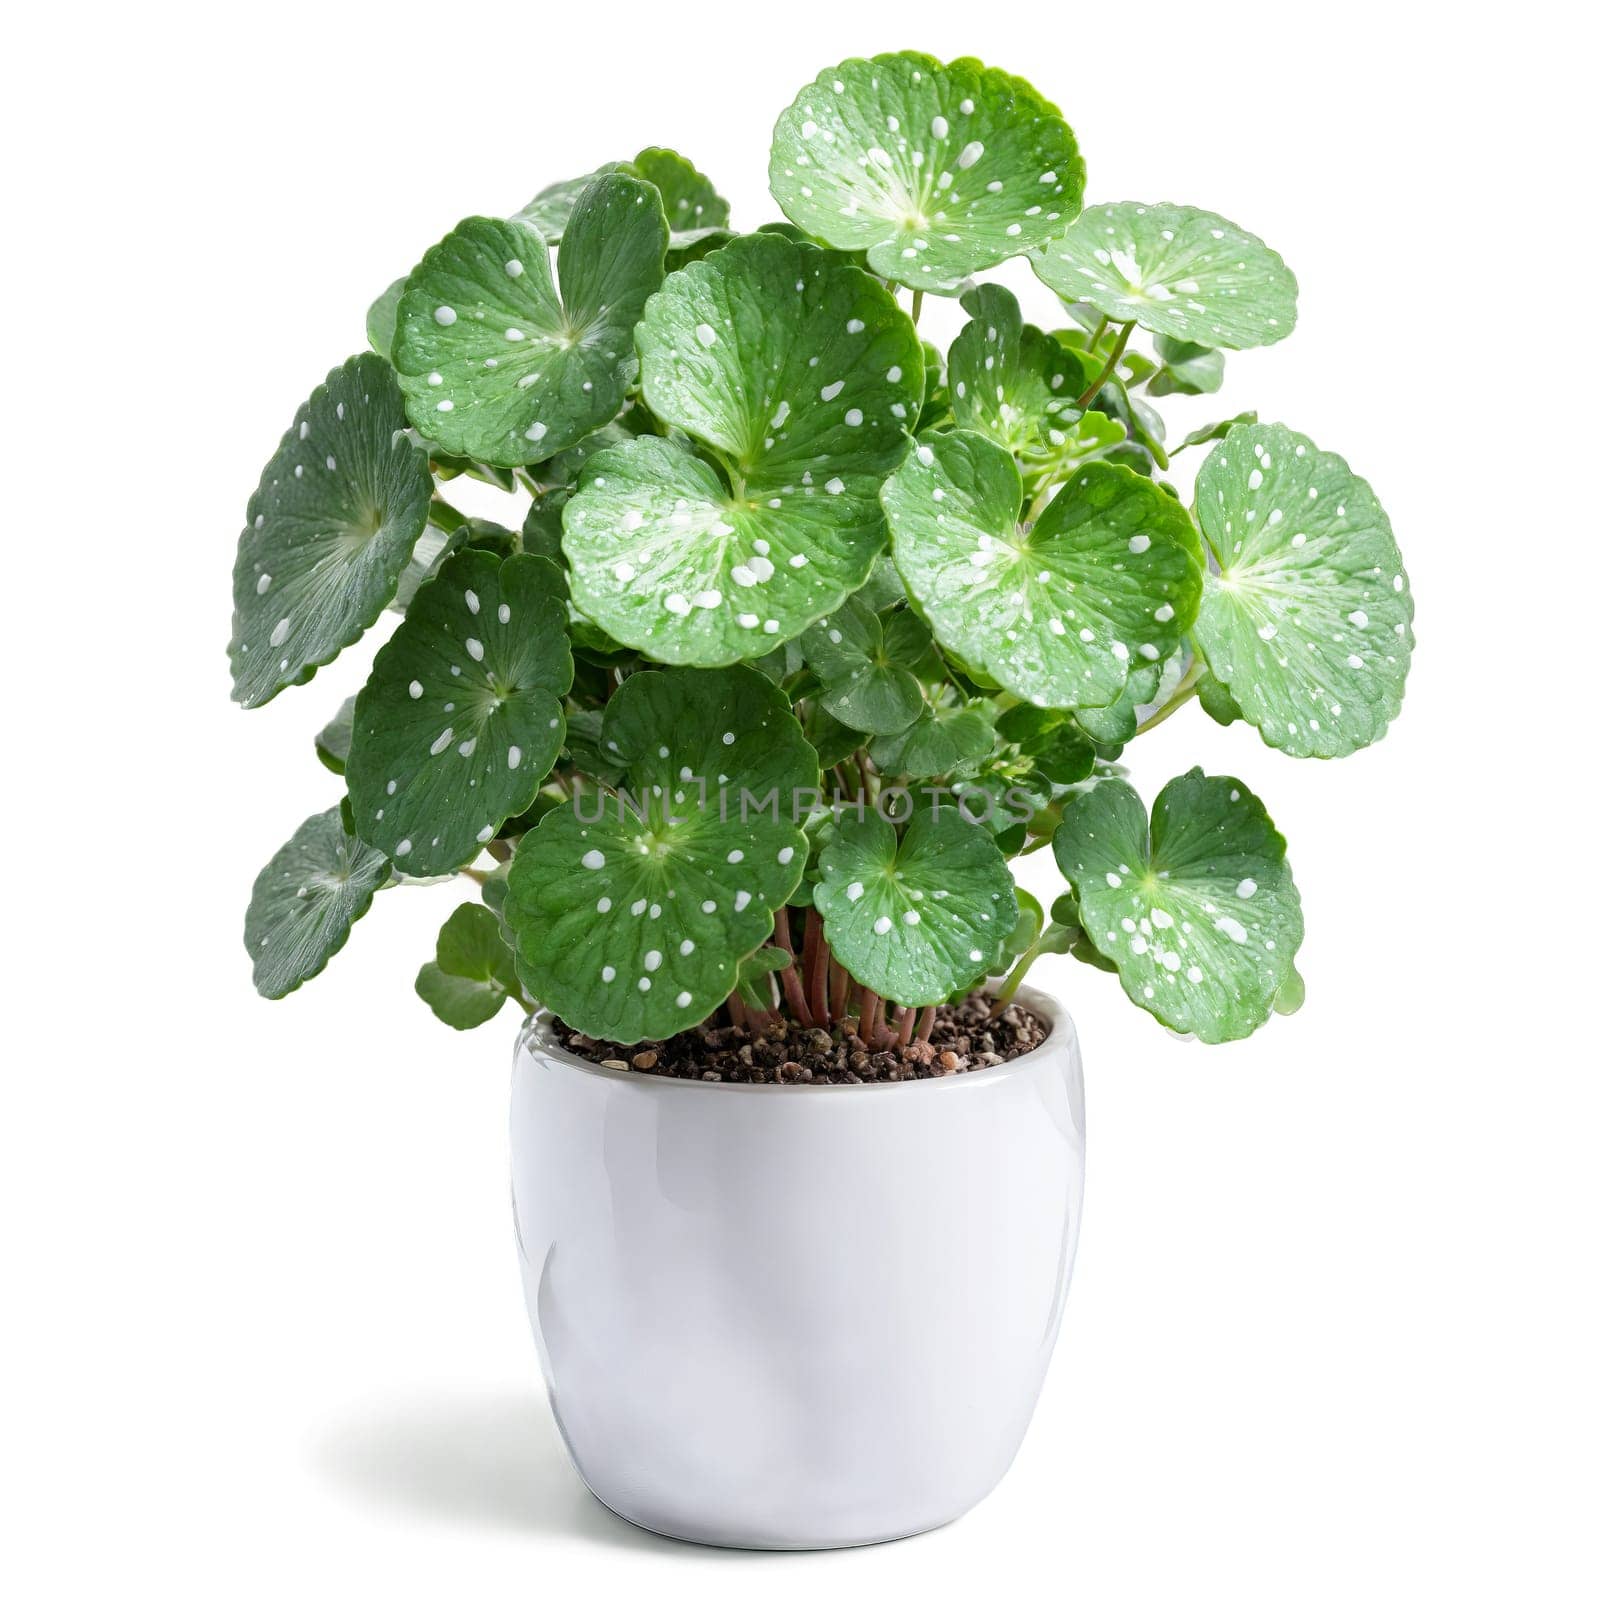 Pilea Cadierei small green leaves with silver spots growing in a compact arrangement in a. Plants isolated on transparent background.